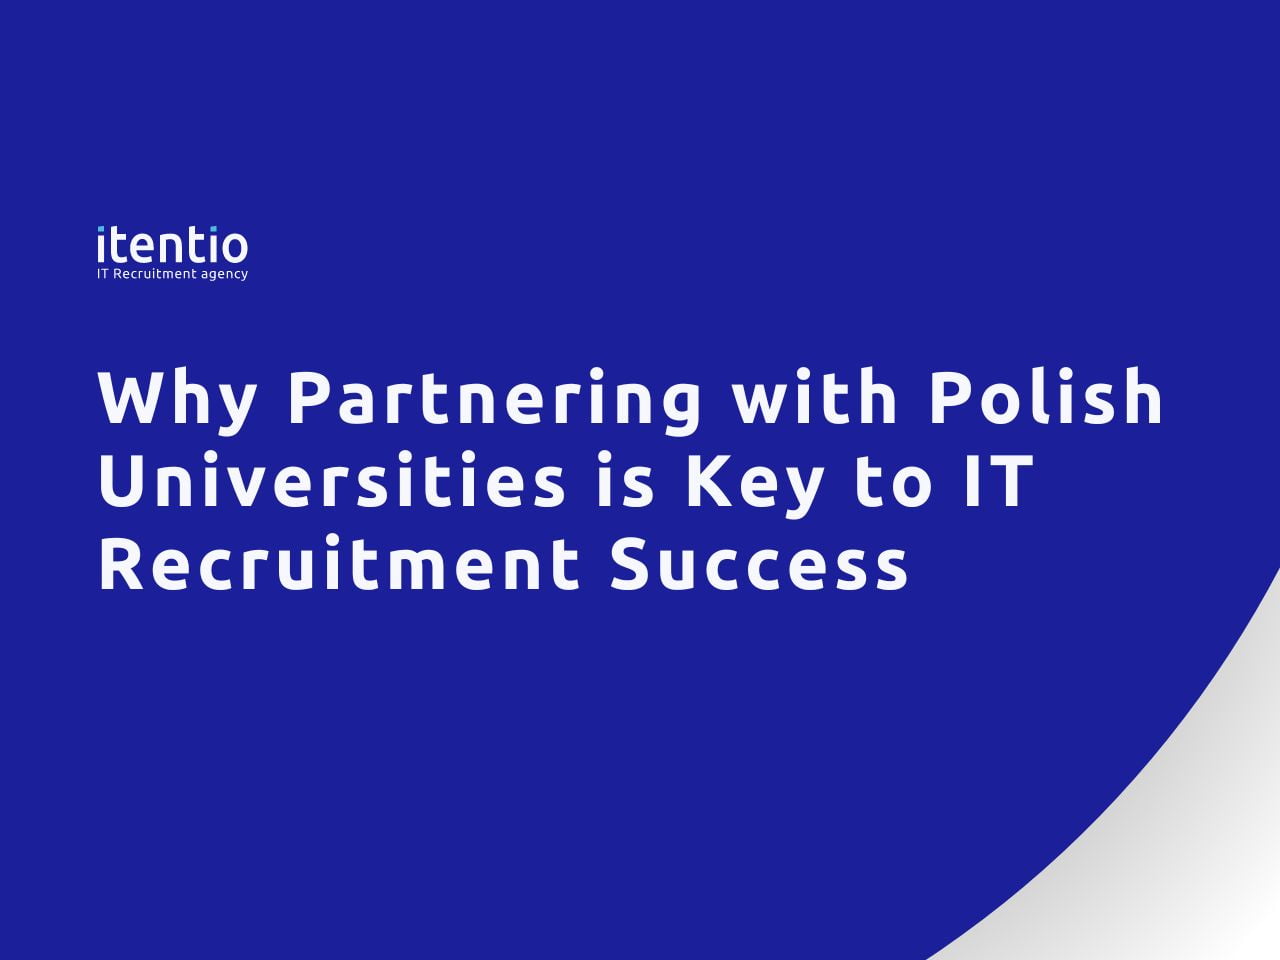 Why Partnering with Polish Universities is Key to IT Recruitment Success